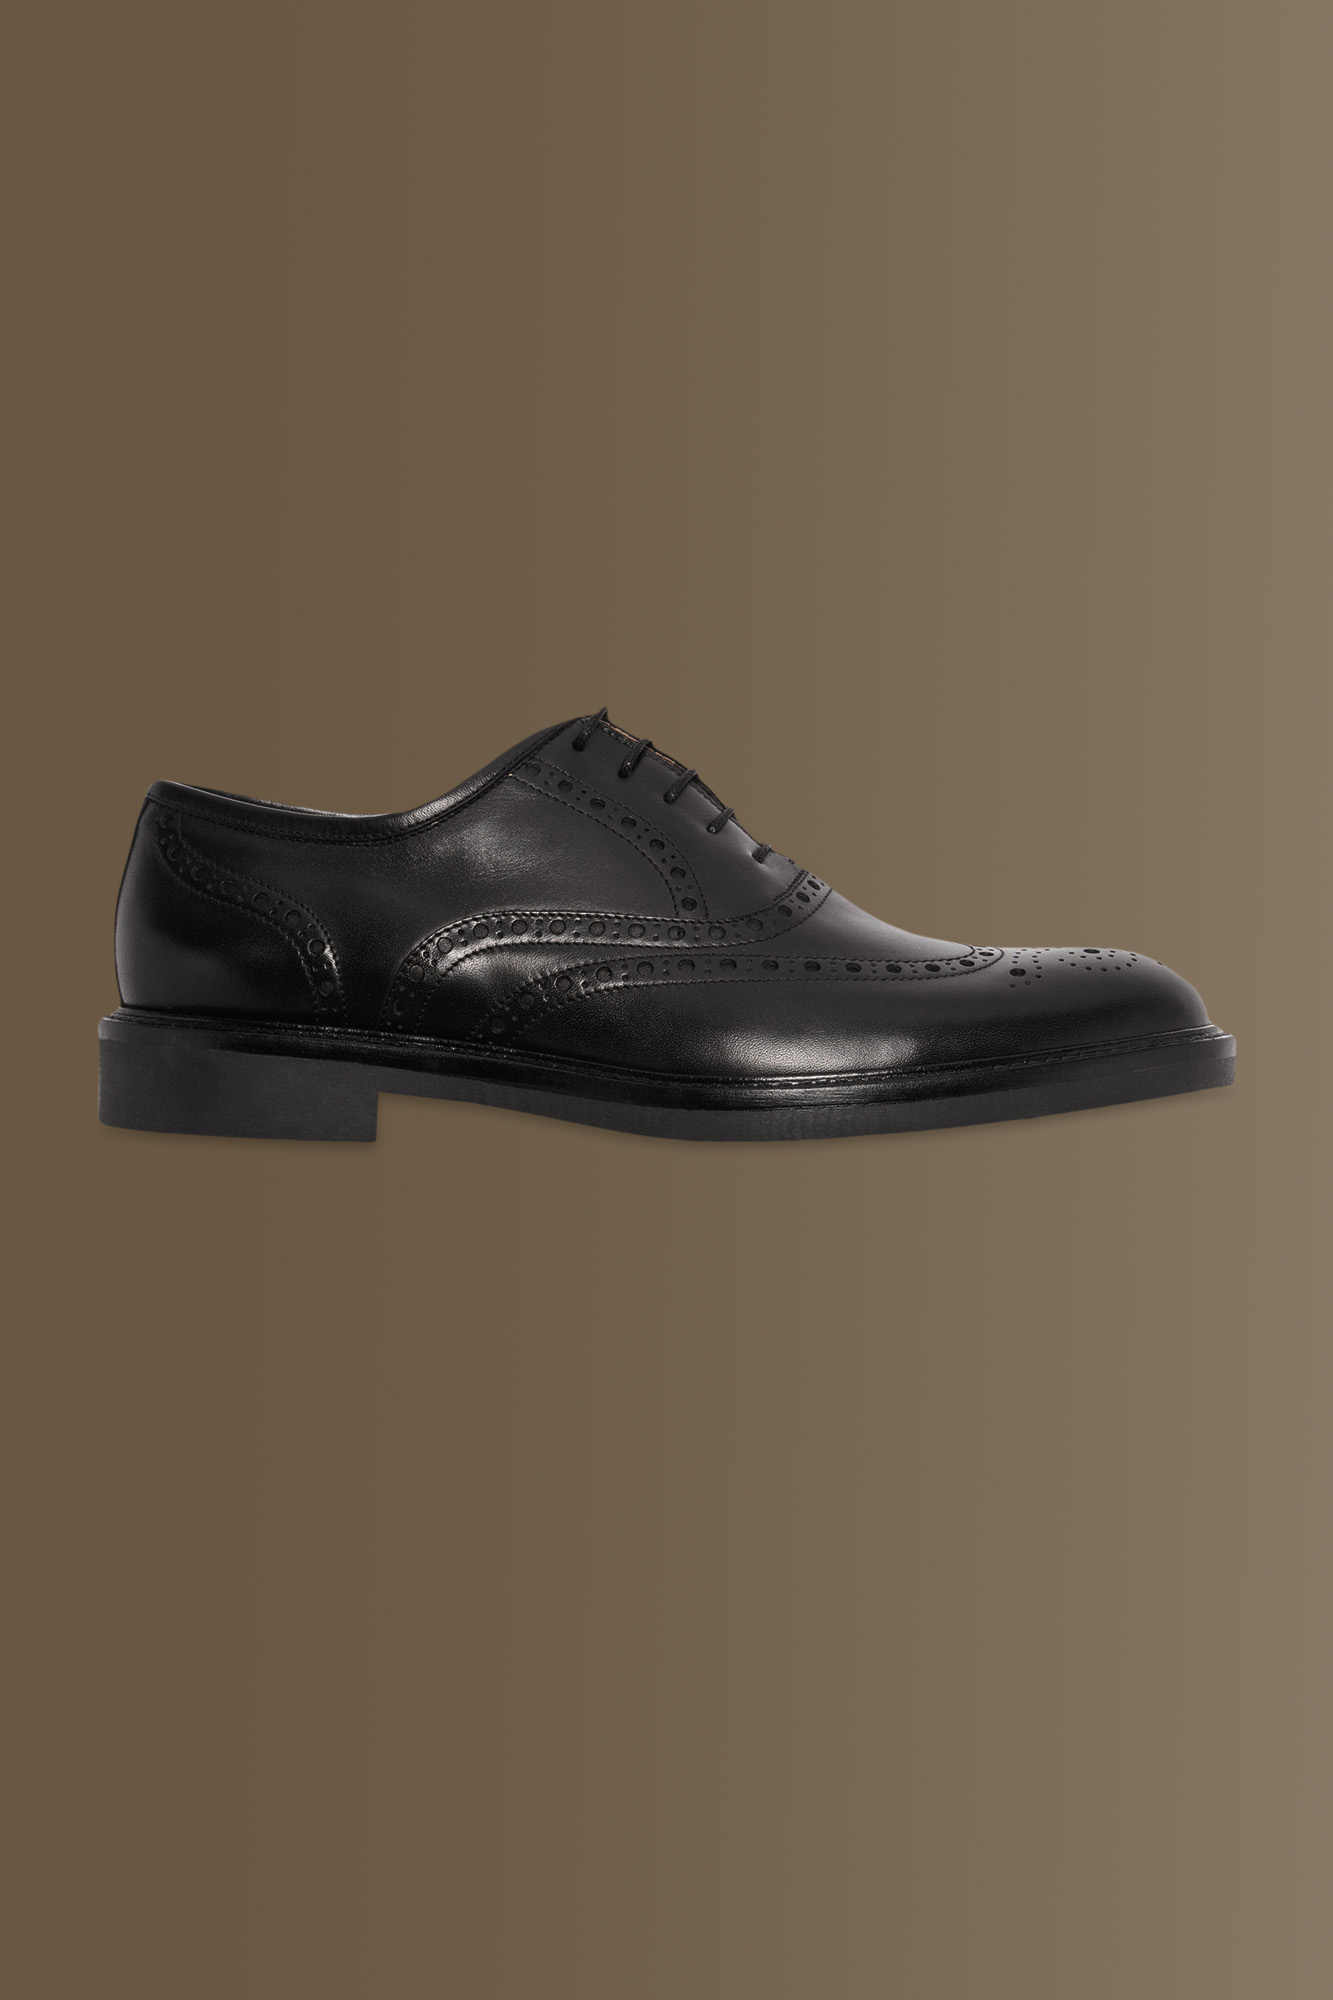 Scarpa uomo oxford Brouge 100% pelle image number null